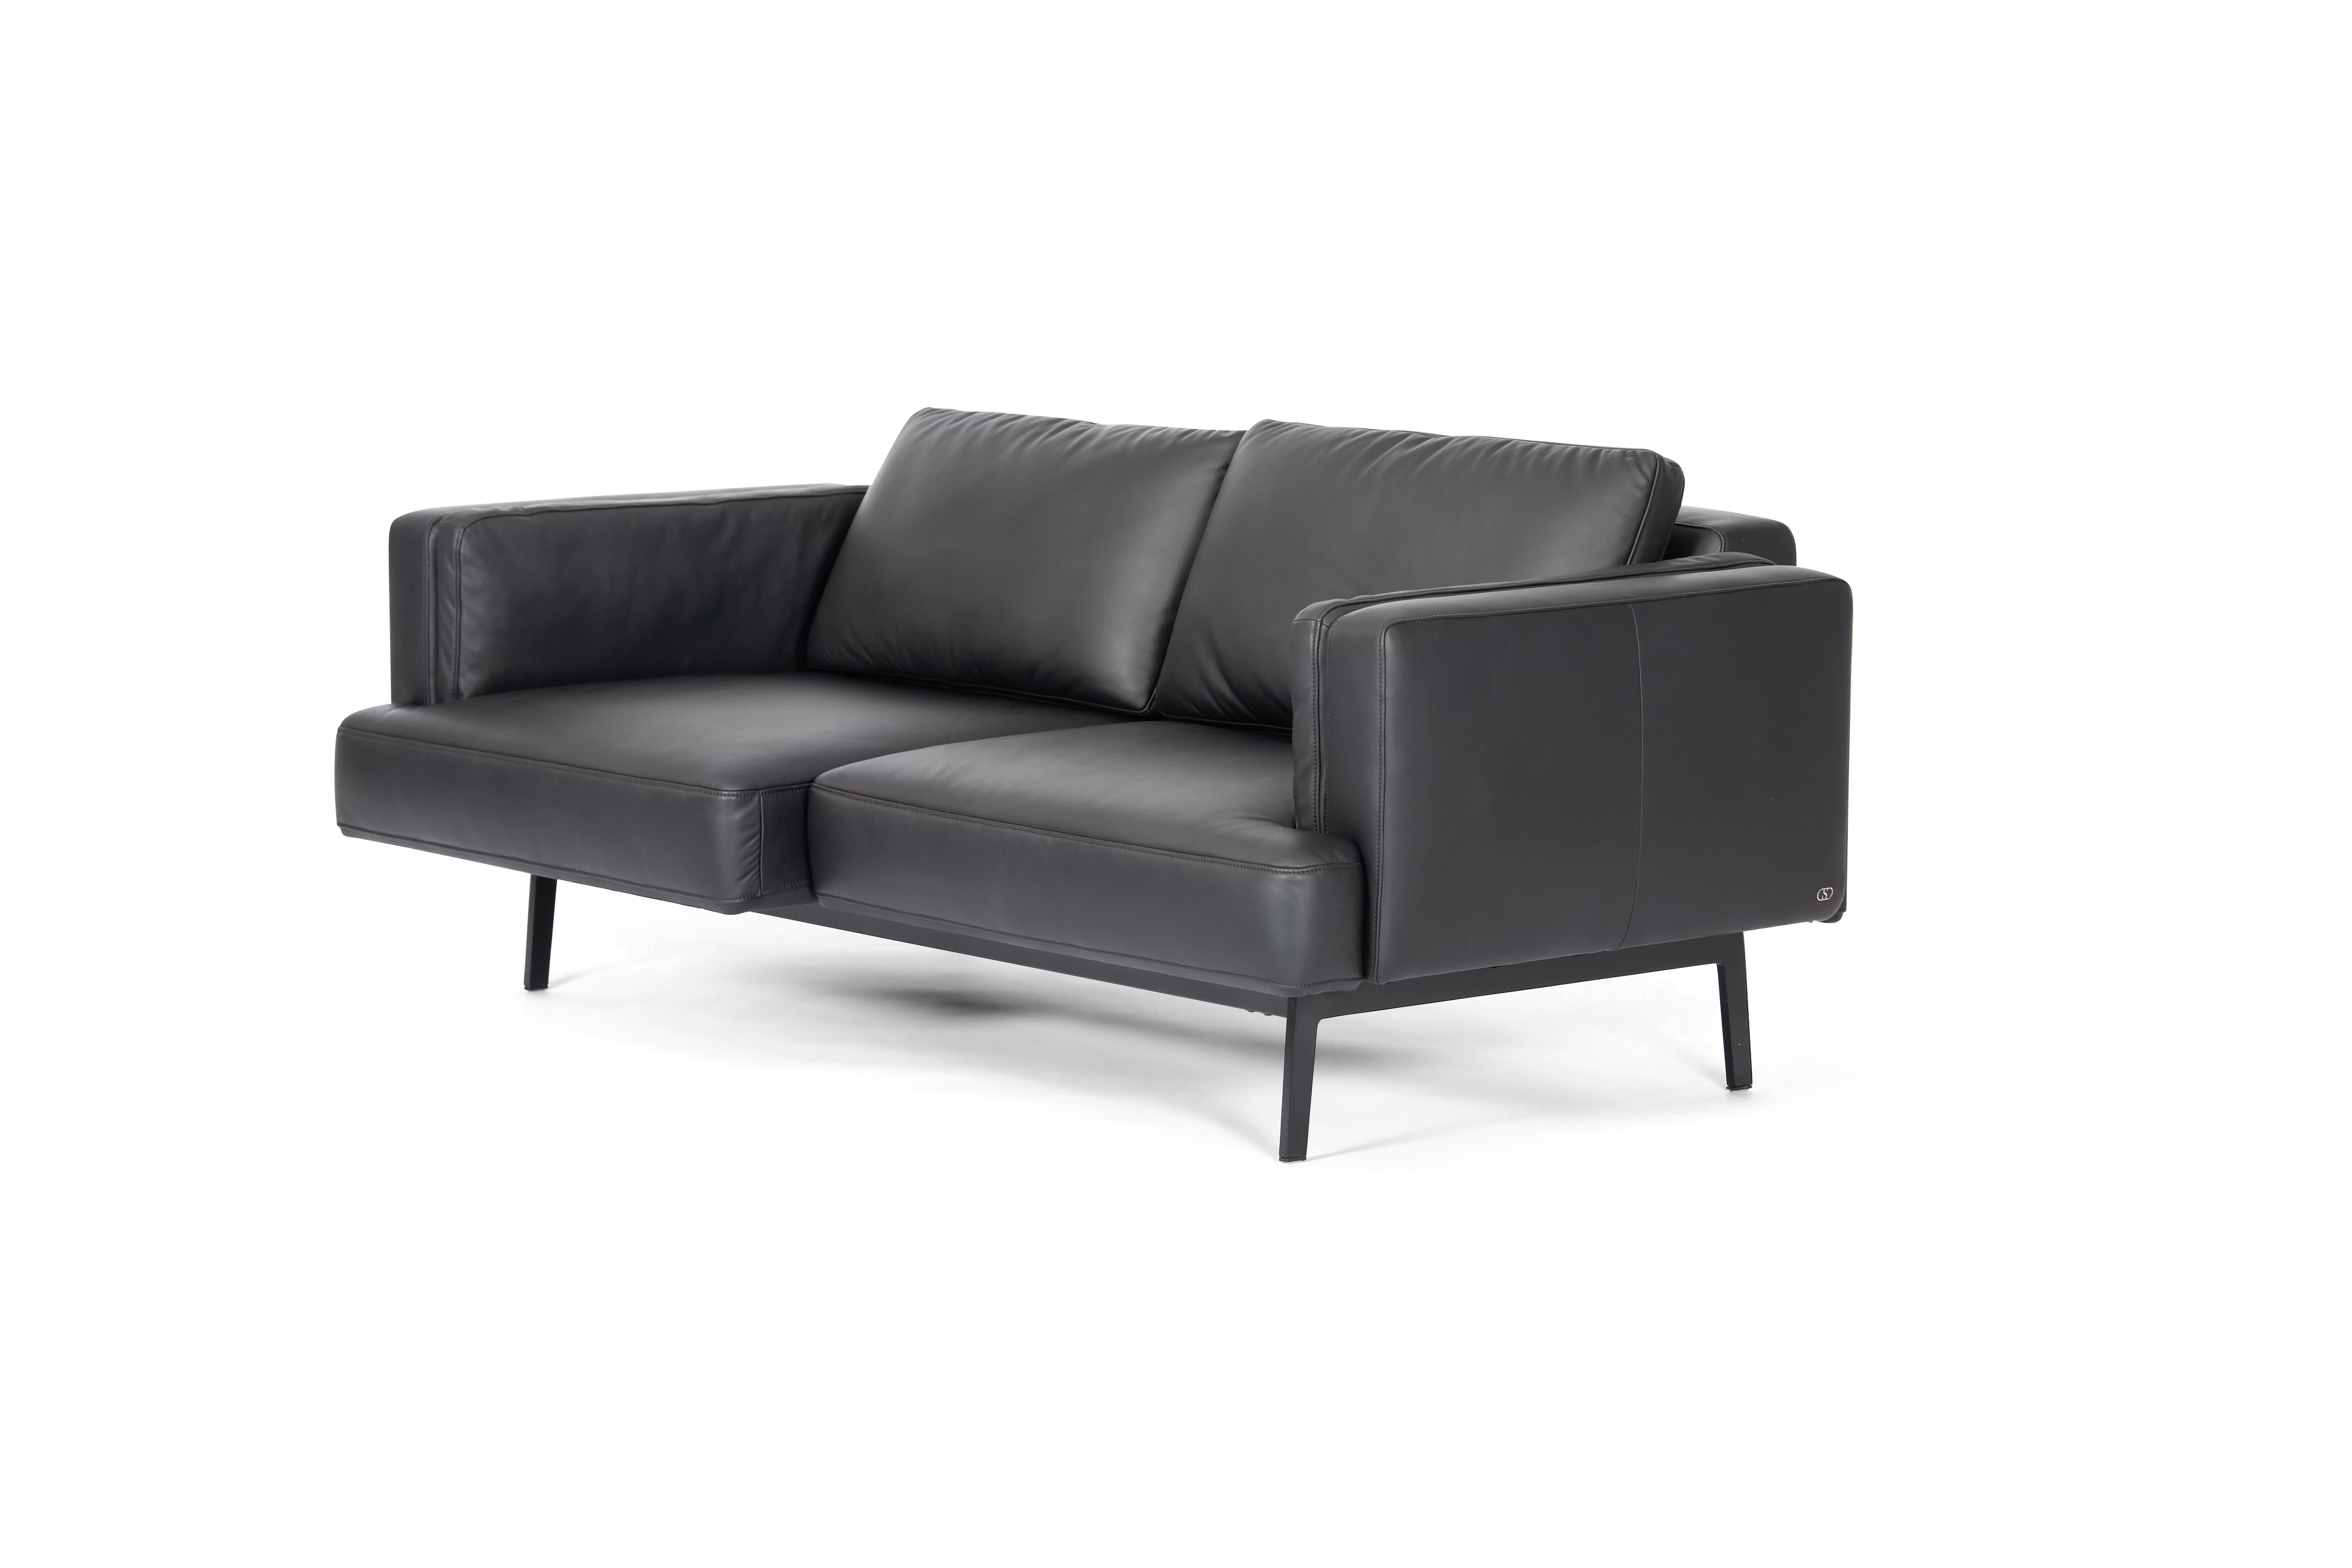 Swiss DeSede DS-747/02 Multifunctional Sofa in Black Leather Seat and Back Upholstery For Sale